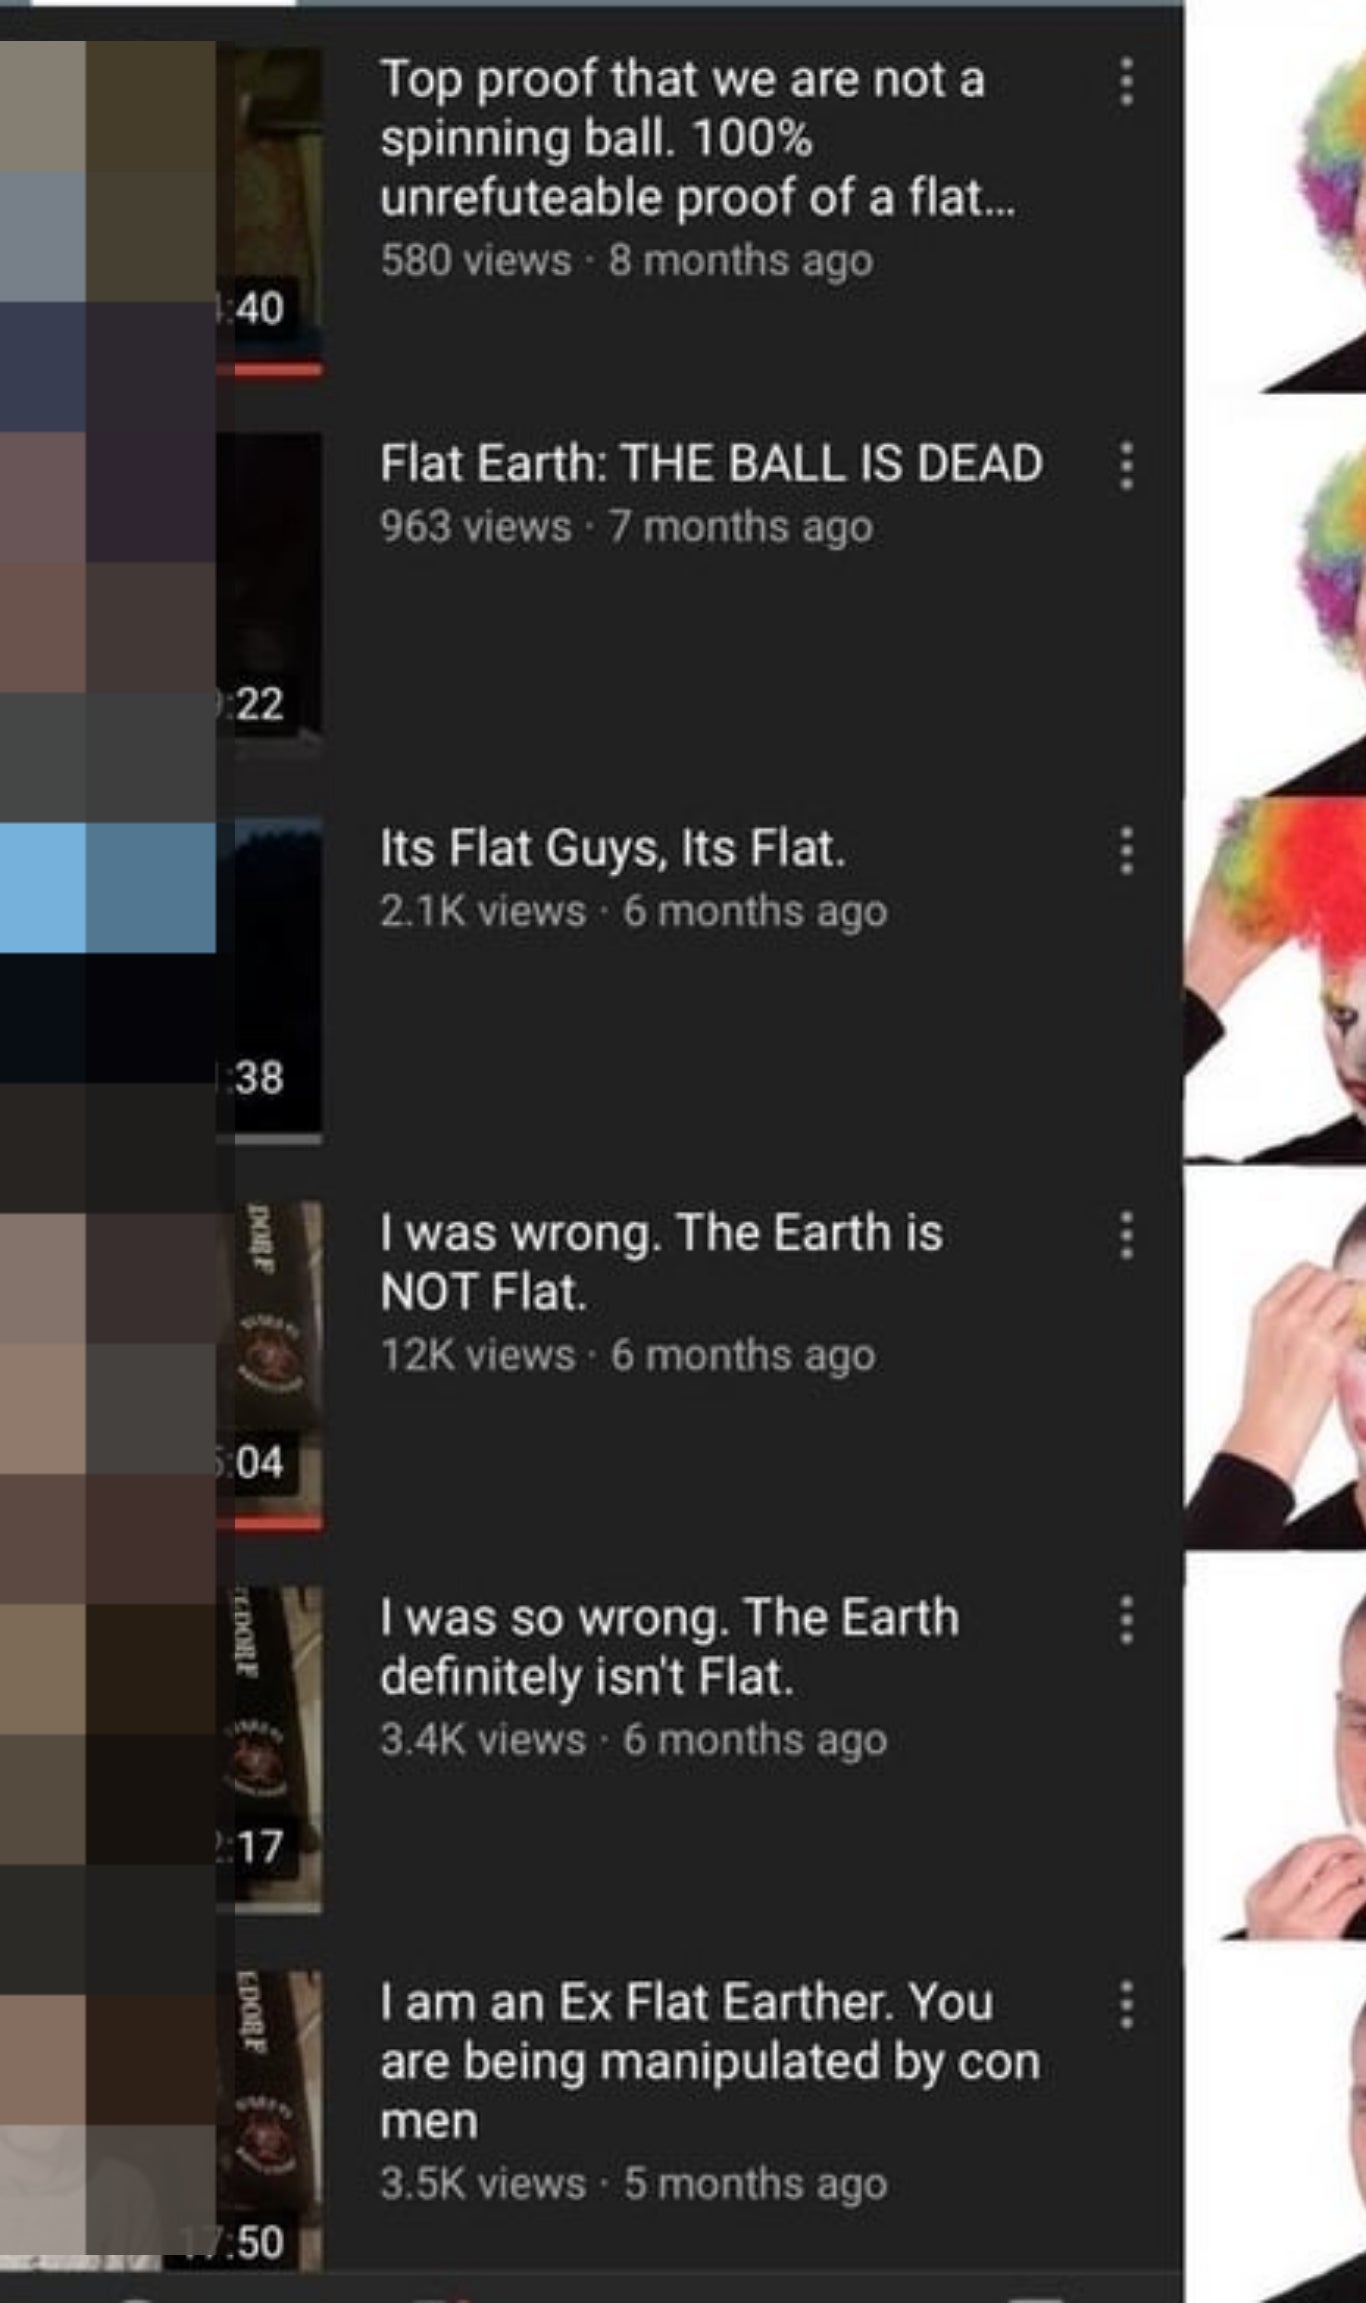 first video says the earth is flat and then the last video says i am an ex flat earther